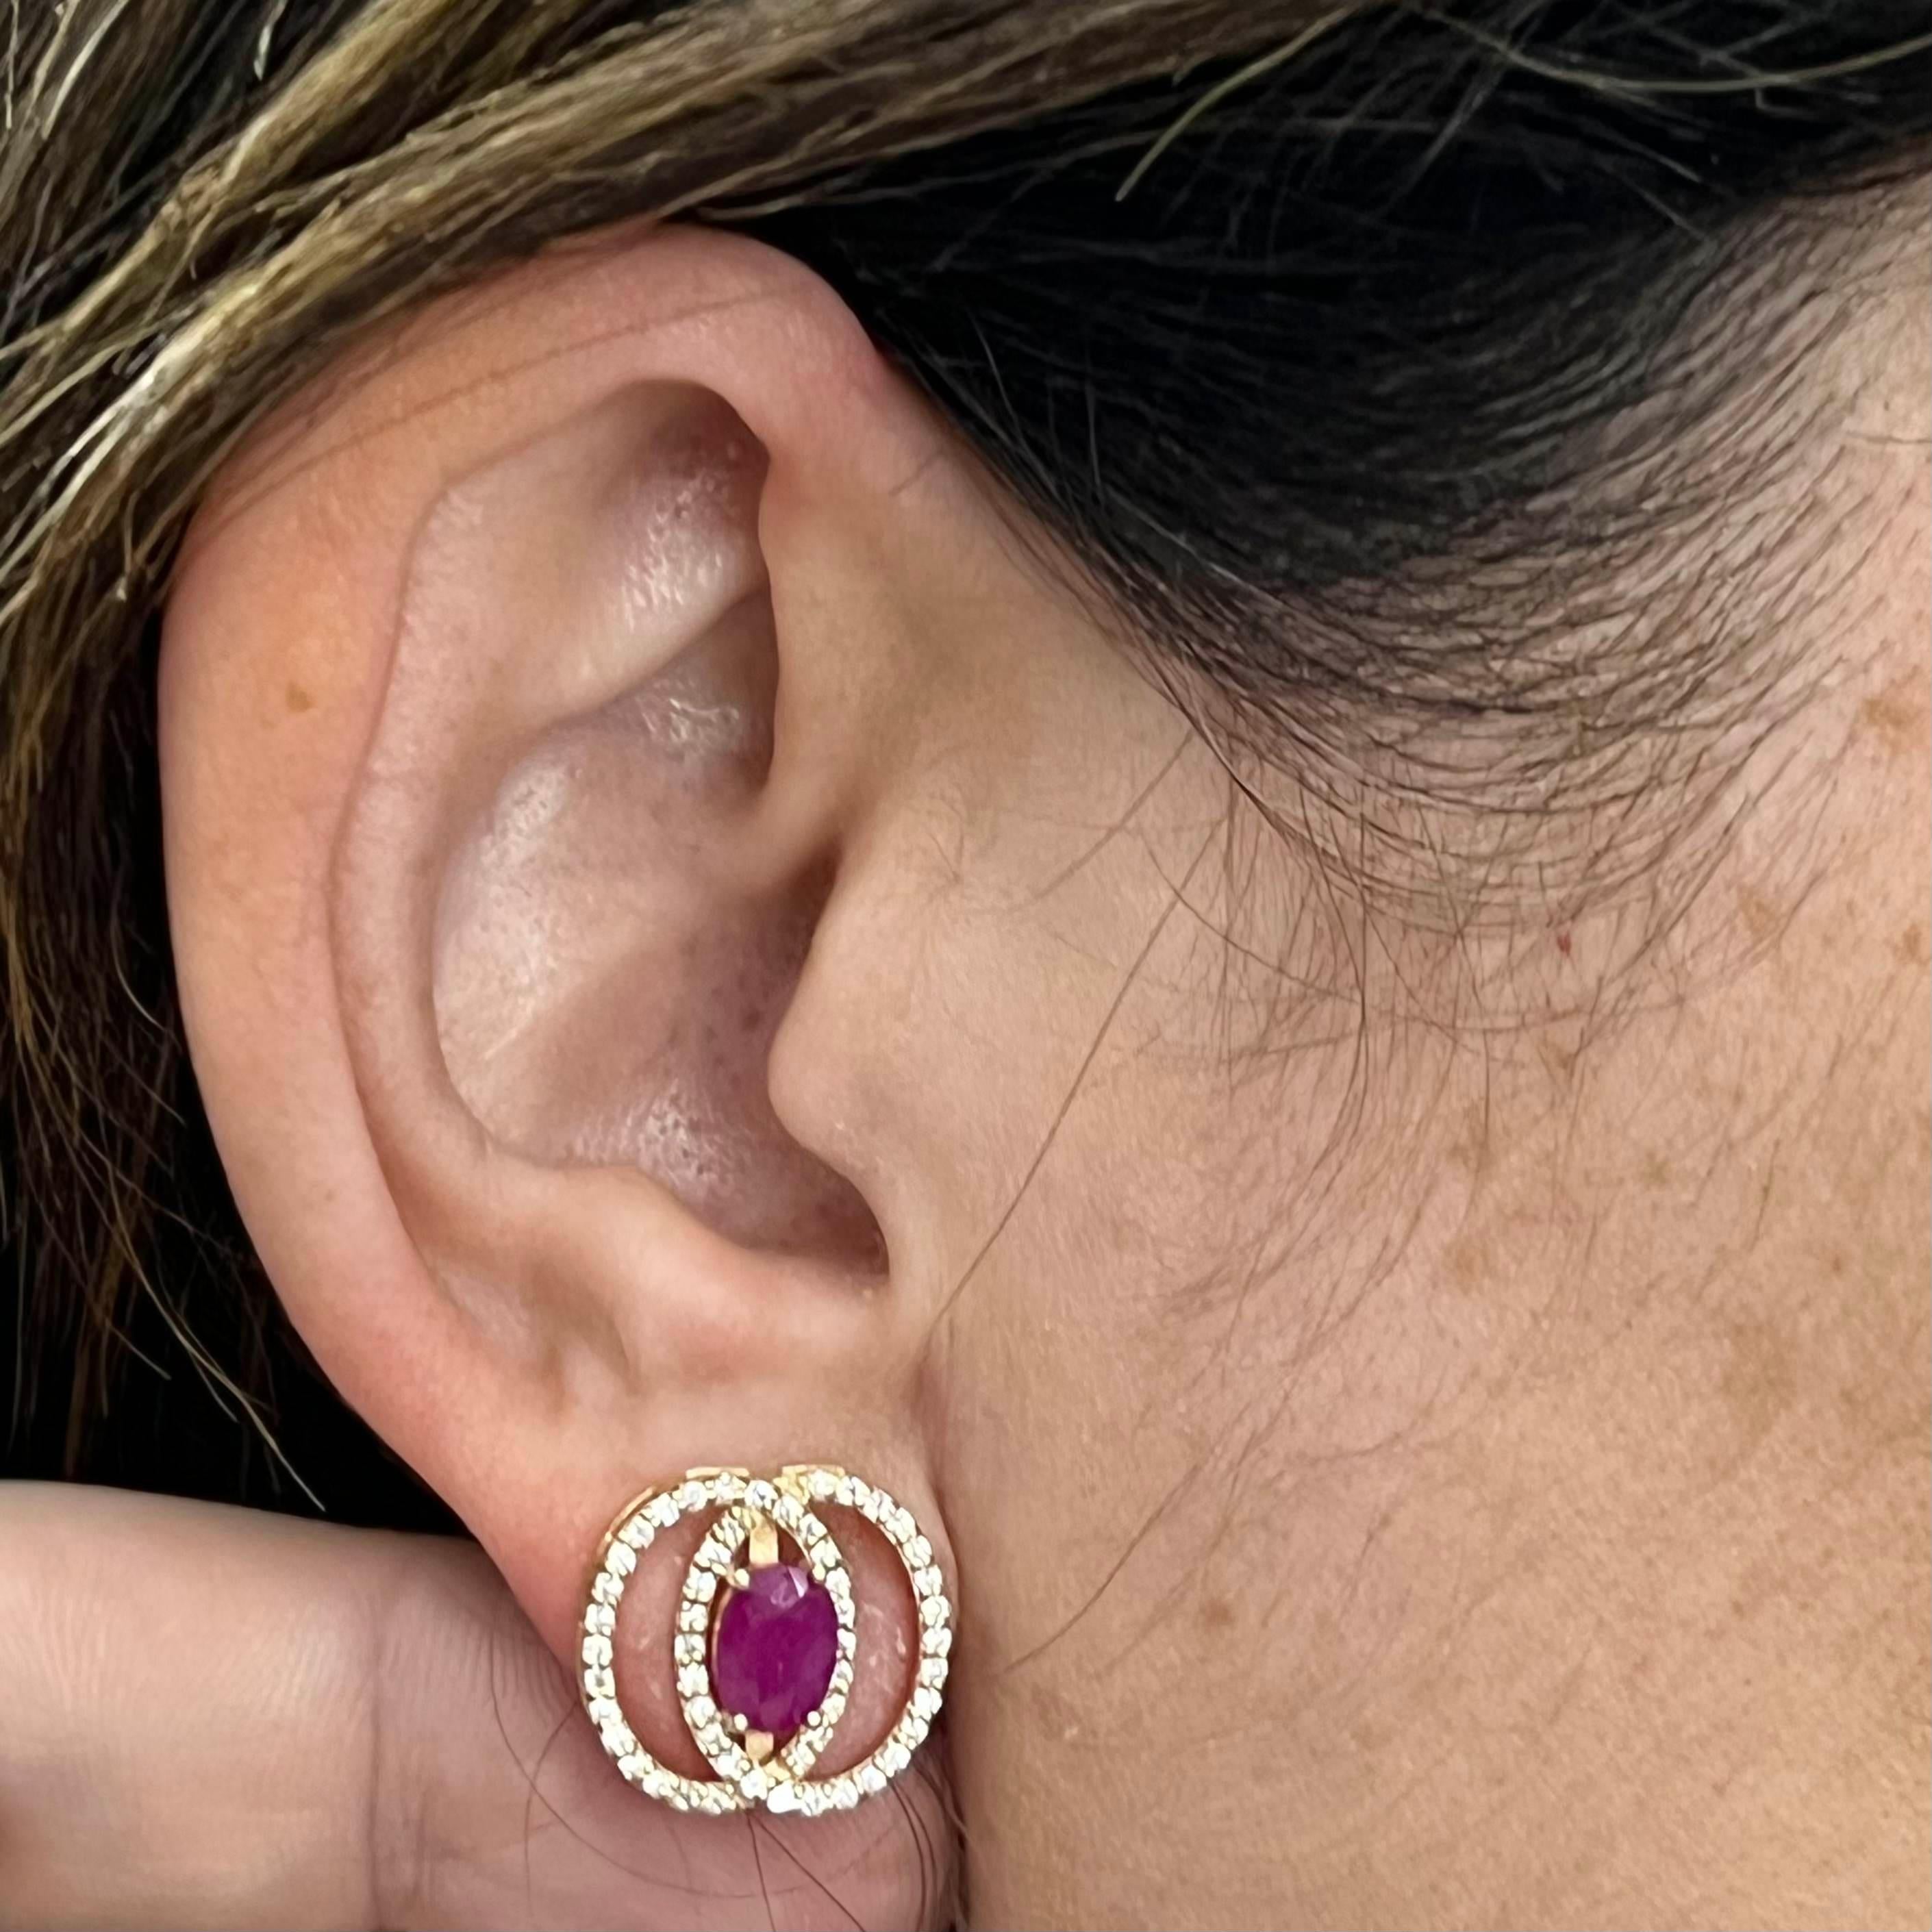 Diamond and Natural Untreated Finely Faceted Quality Ruby Stud Earrings 14k Yellow Gold 2.90 mm Certified $5,950 018661

This is a One of a Kind Unique Custom Made Glamorous Piece of Jewelry!

Nothing says, “I Love you” more than Diamonds and